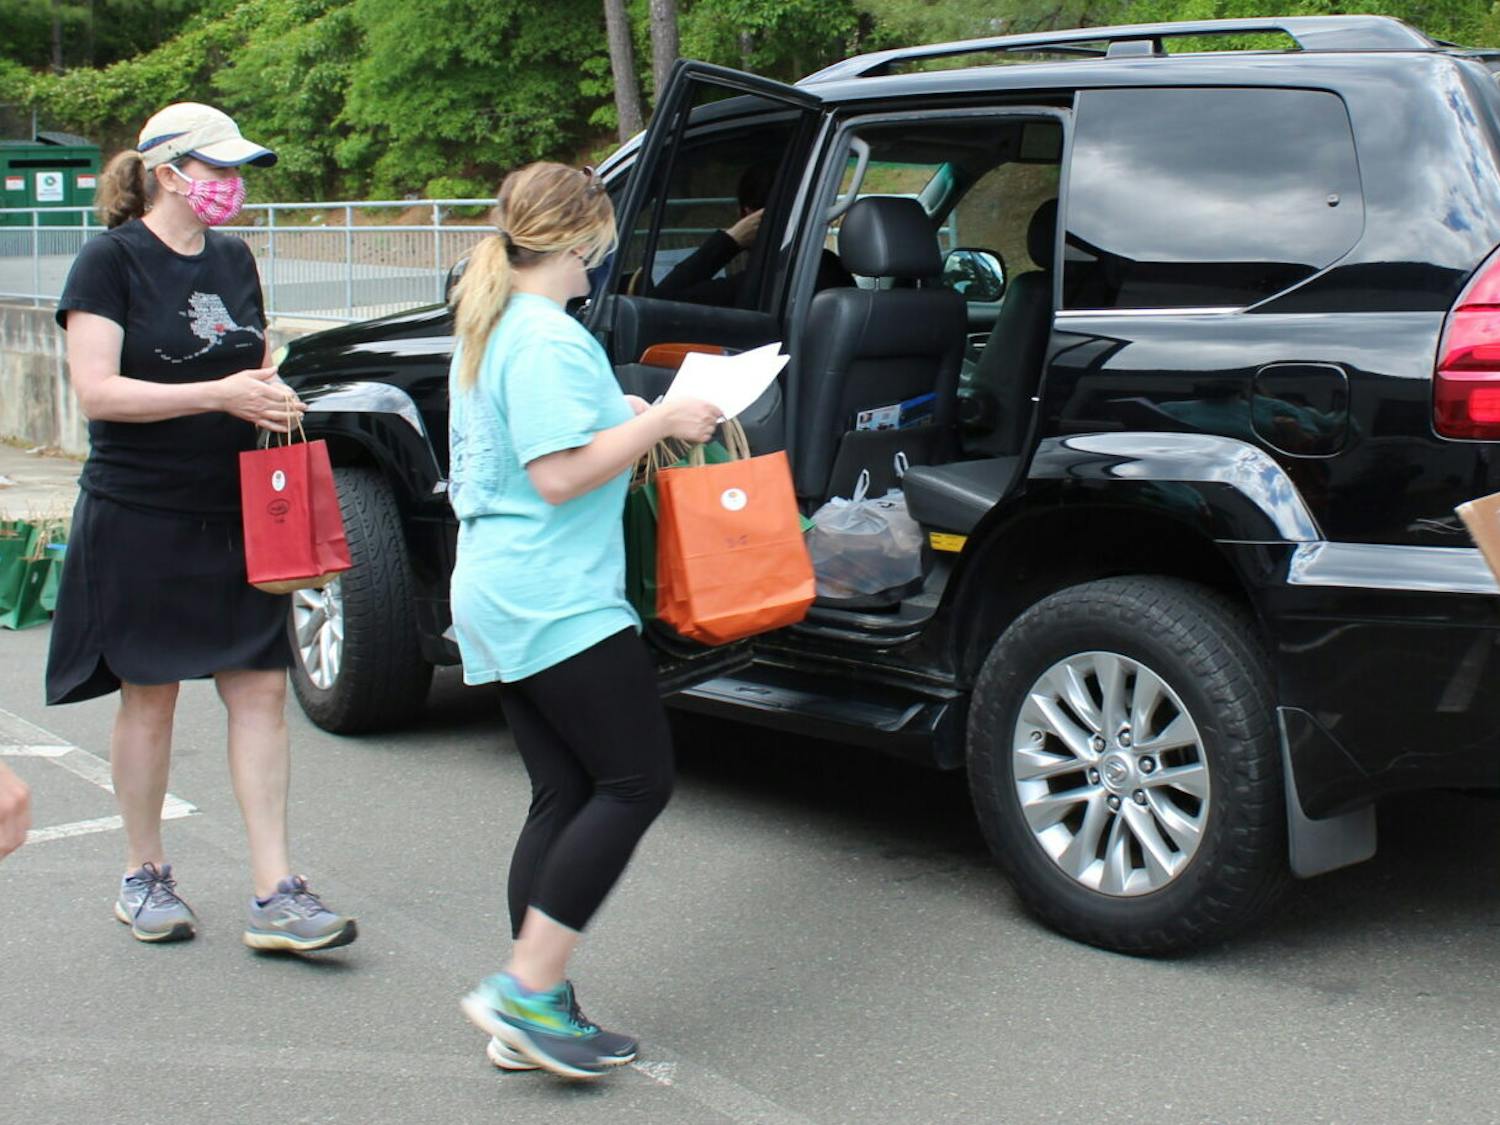 Volunteers for Book Harvest load food and books into cars to be delivered to families across Durham in a collaborative effort with the Durham Public Schools Foundation and Durham FEAST.